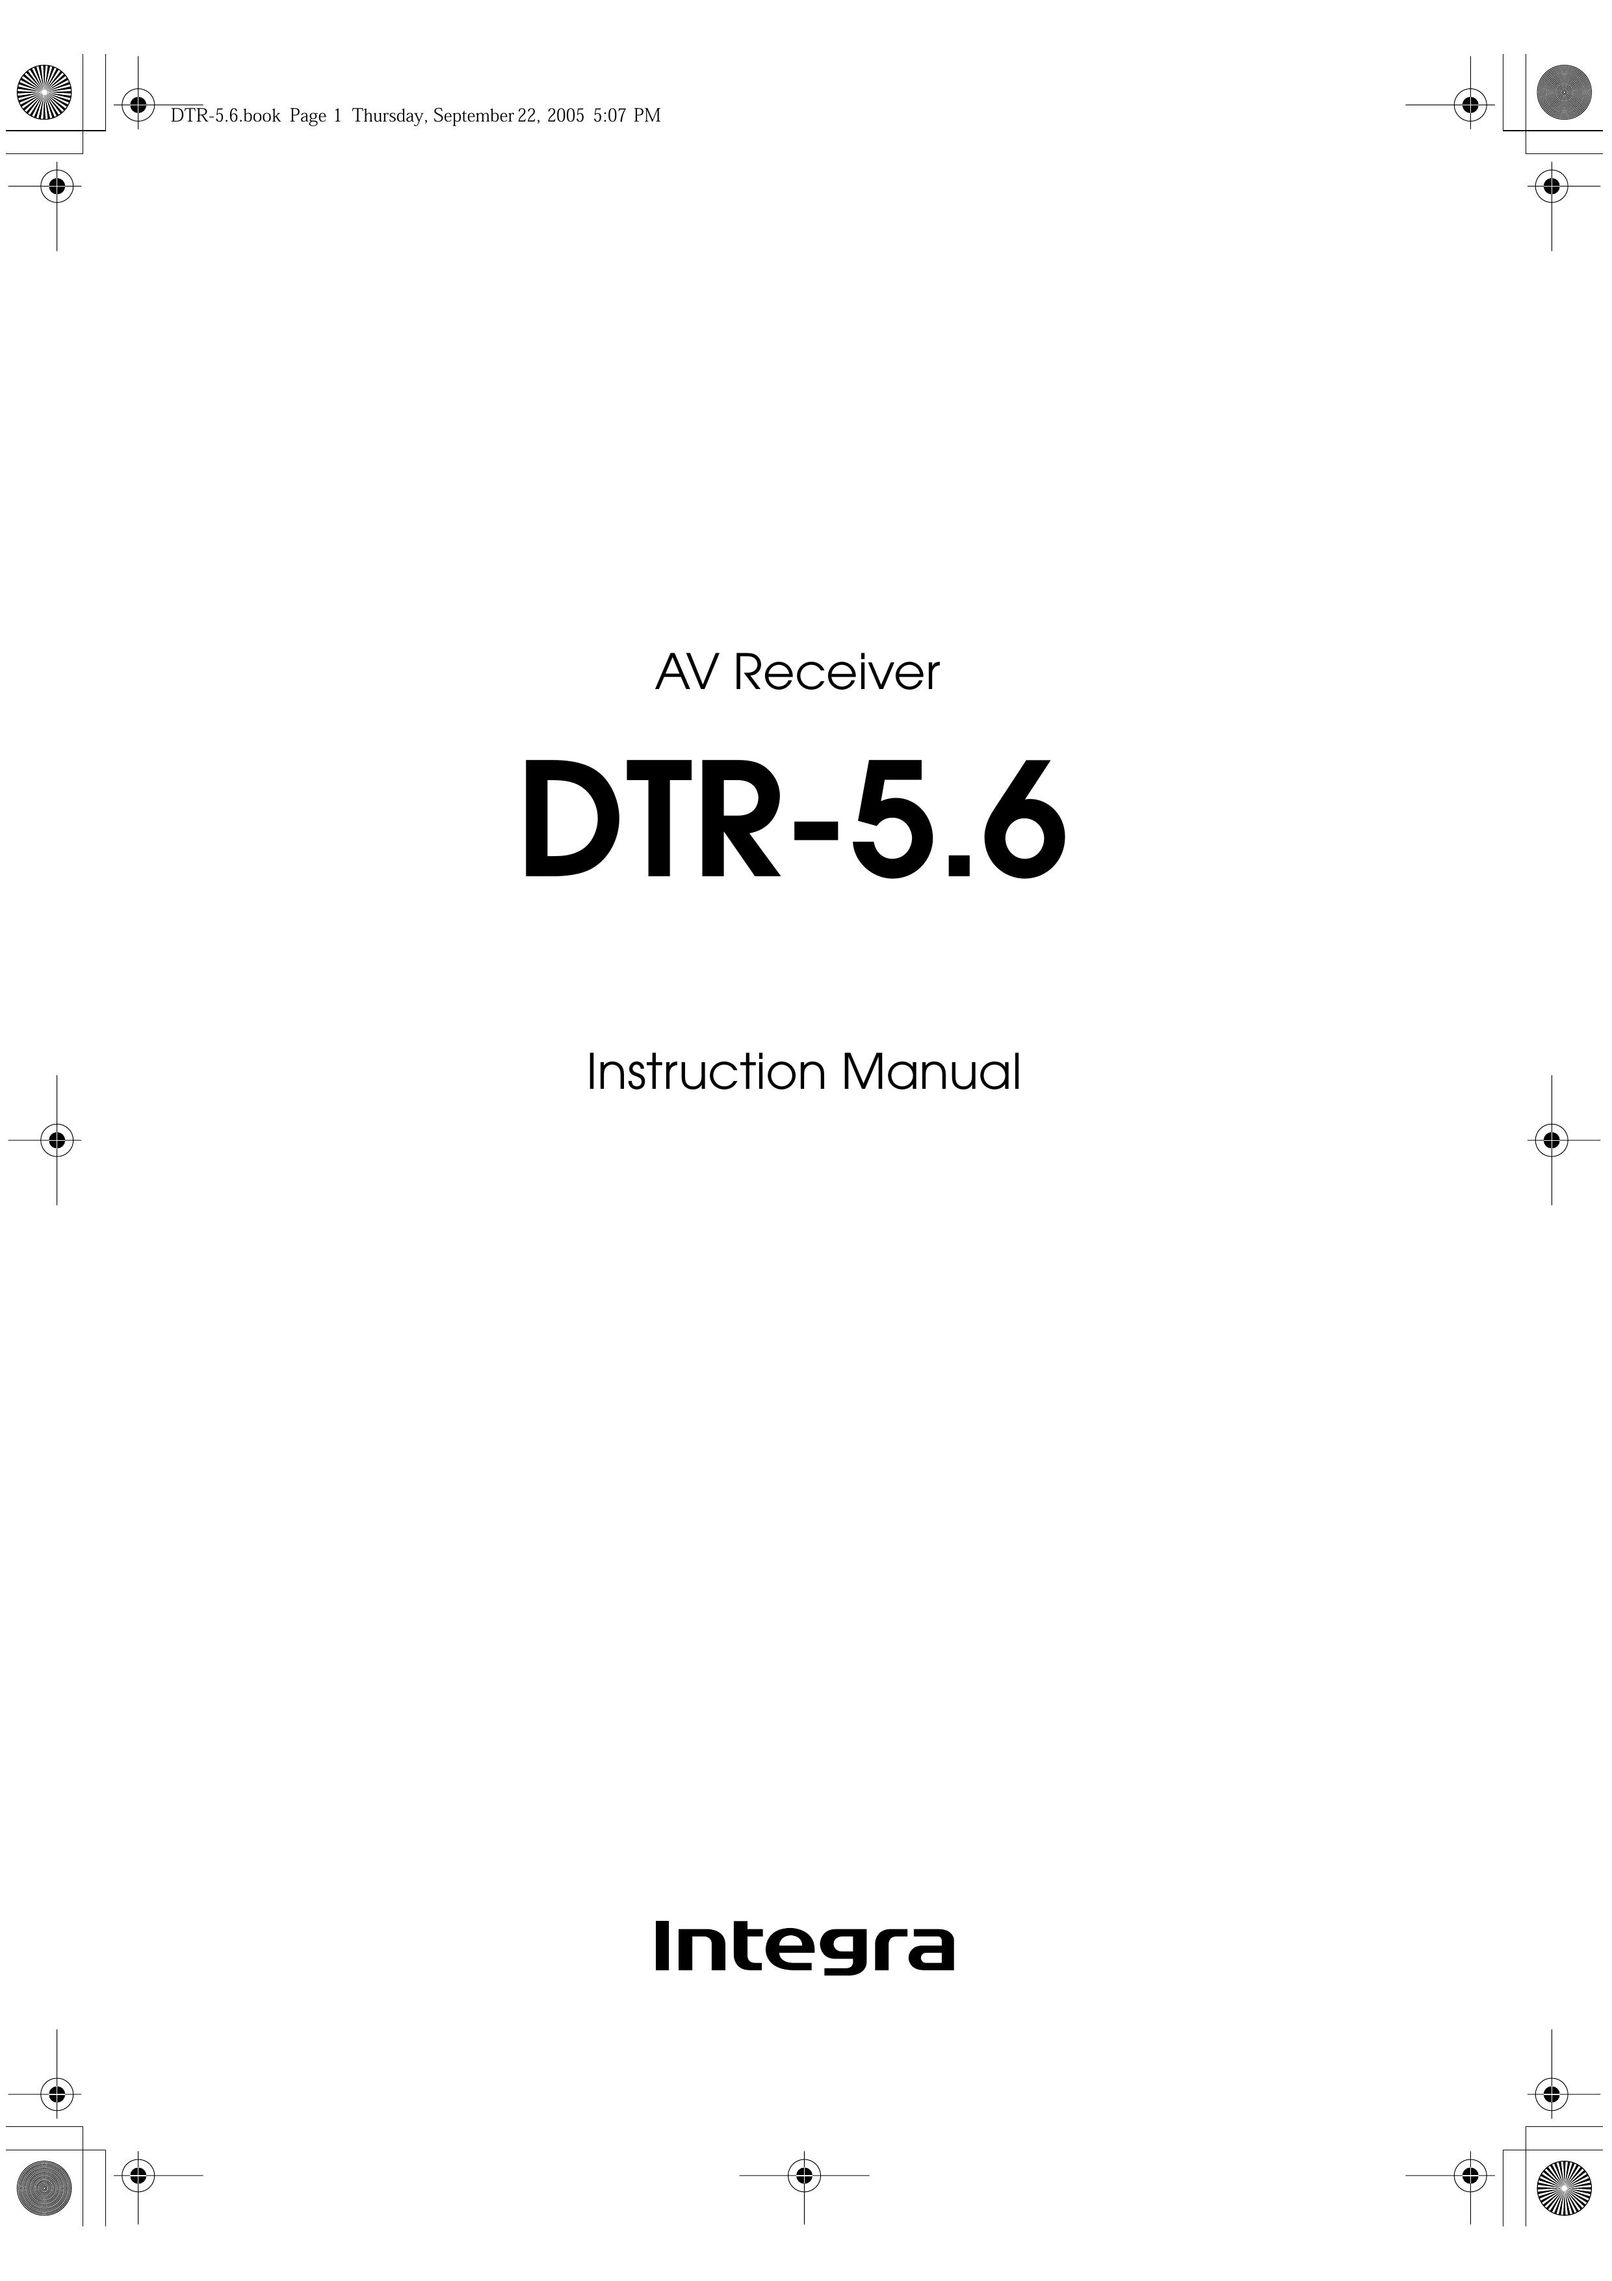 Integra DTR-5.6 Stereo Receiver User Manual (Page 1)